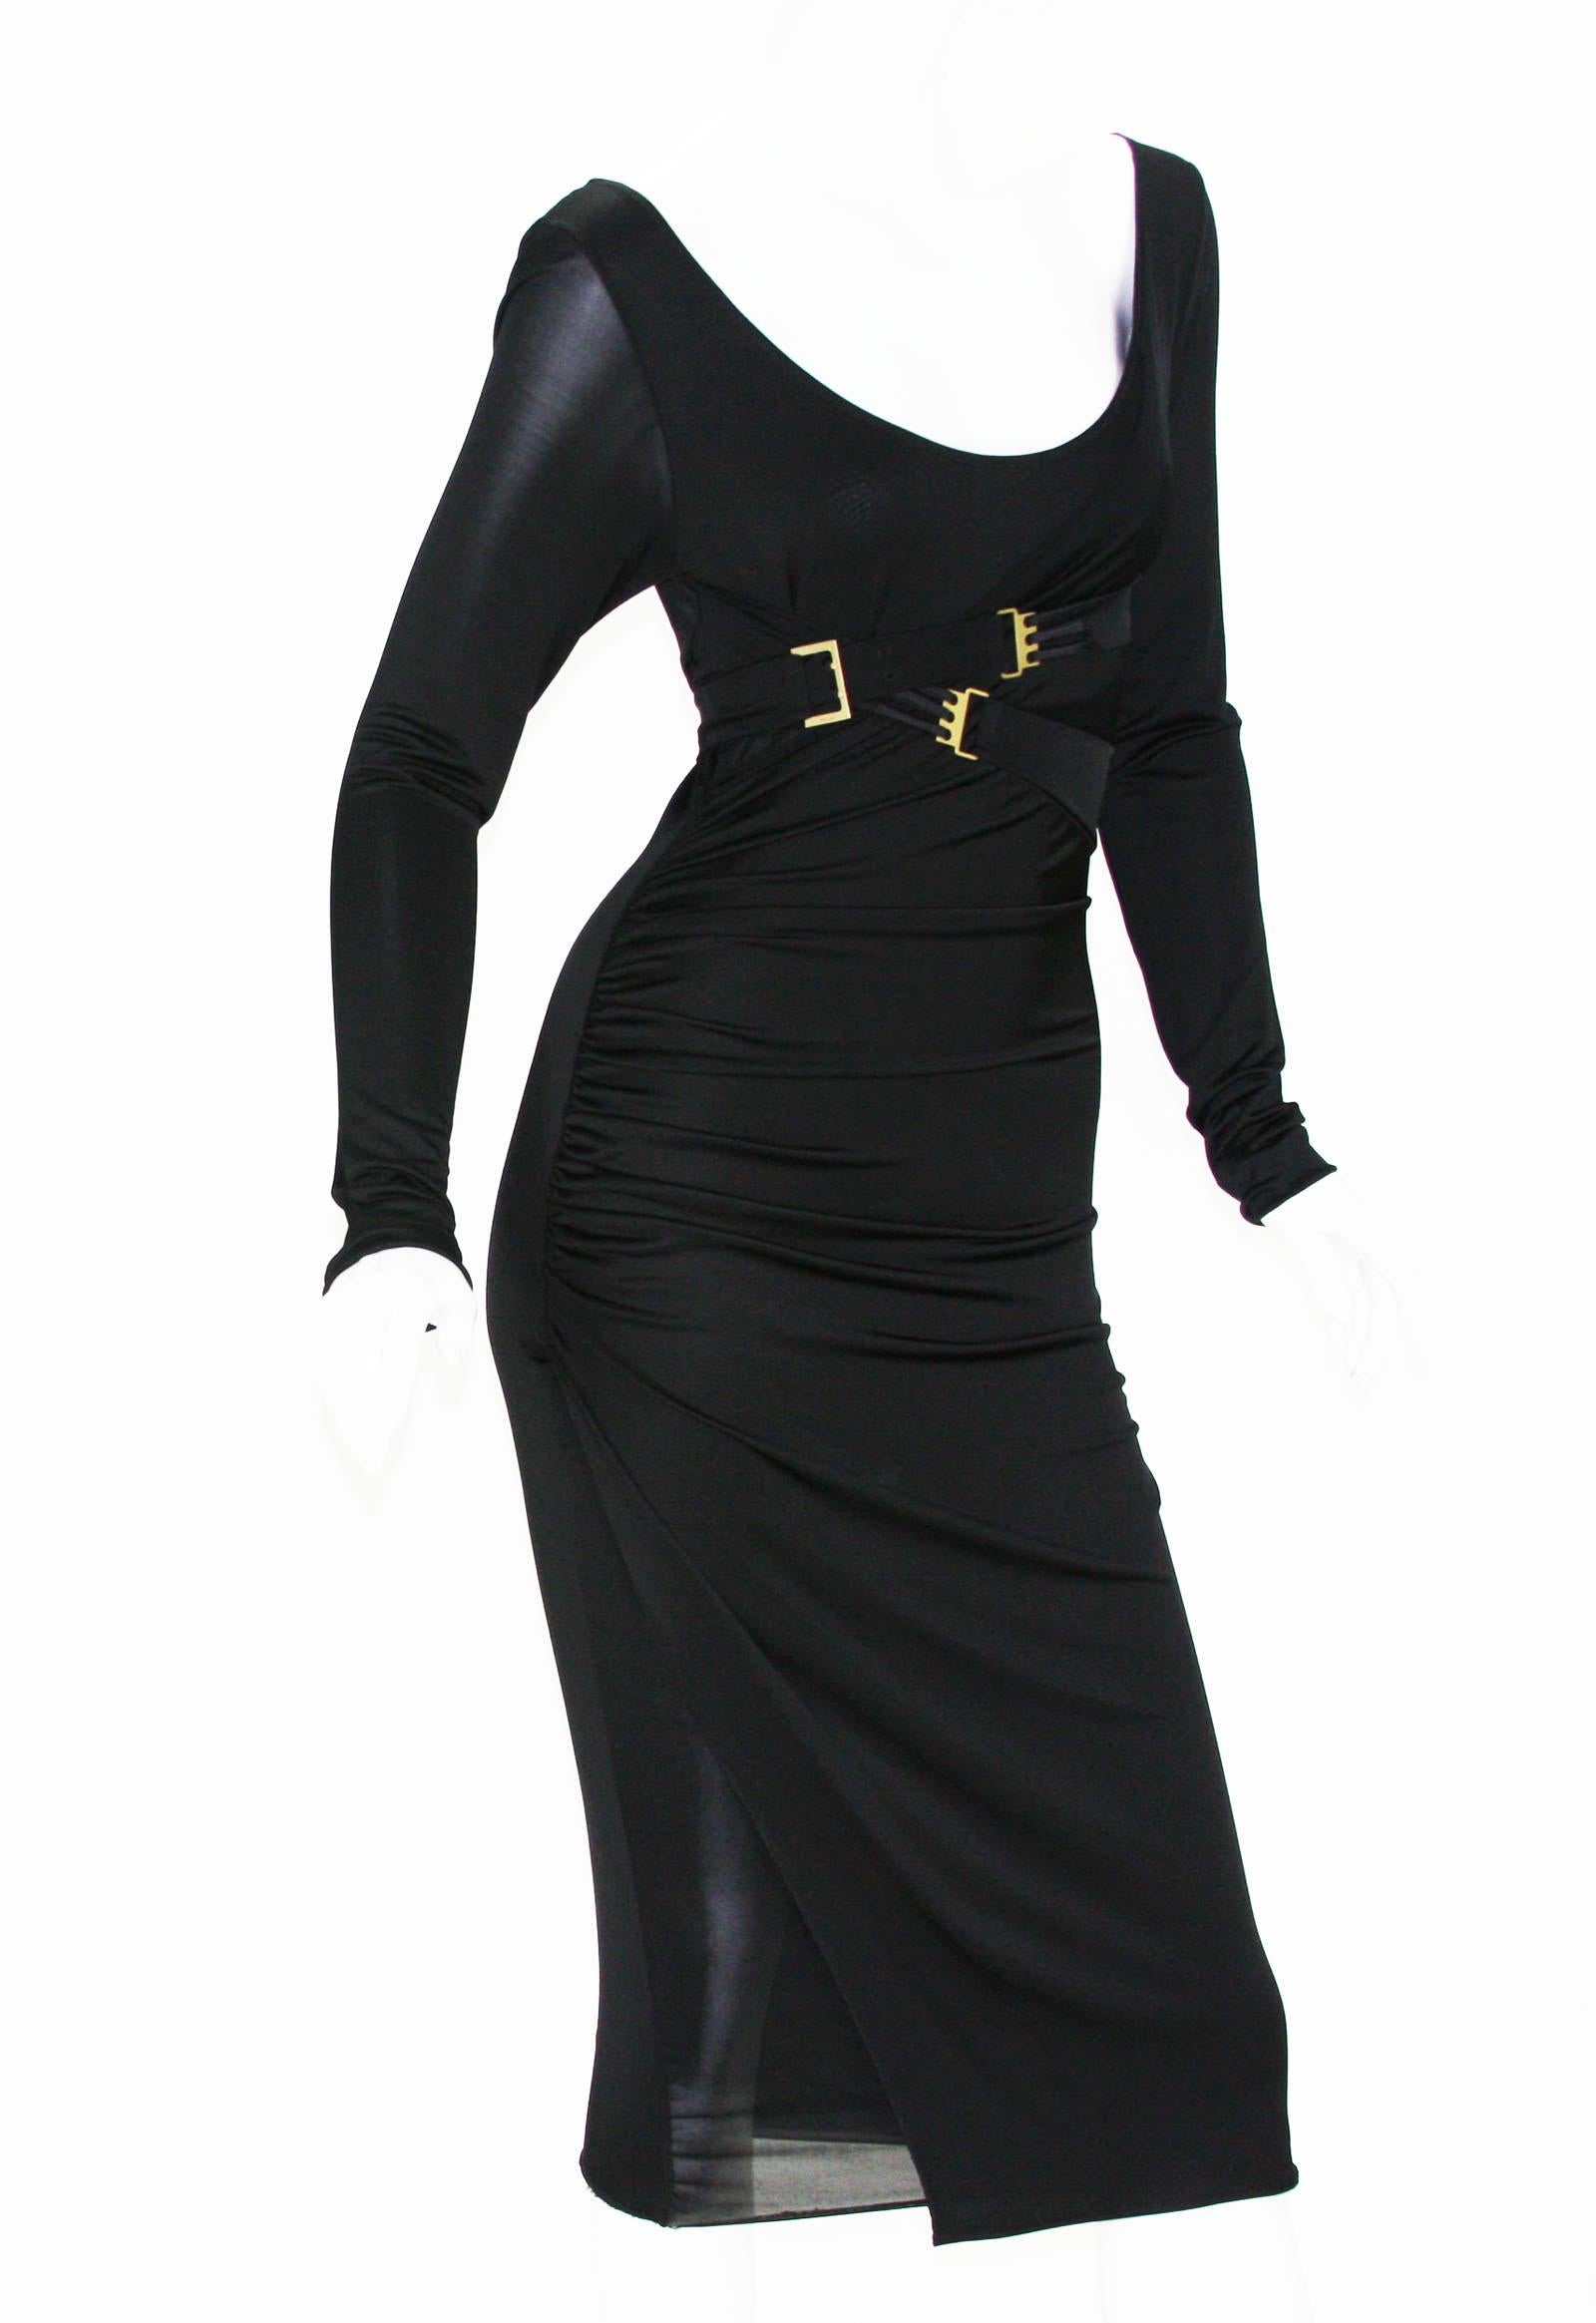 2 IN 1 Unique Tom Ford for Gucci Jersey Stretch Bondage Sexy Cocktail Dress
Available in sizes S and M
Black Stretch Jersey, Rushed and Wrap Details, Bronze-tone Metal Buckles with Gucci Engraving.
Dress Has Cross Over Straps That Can be Tied Around